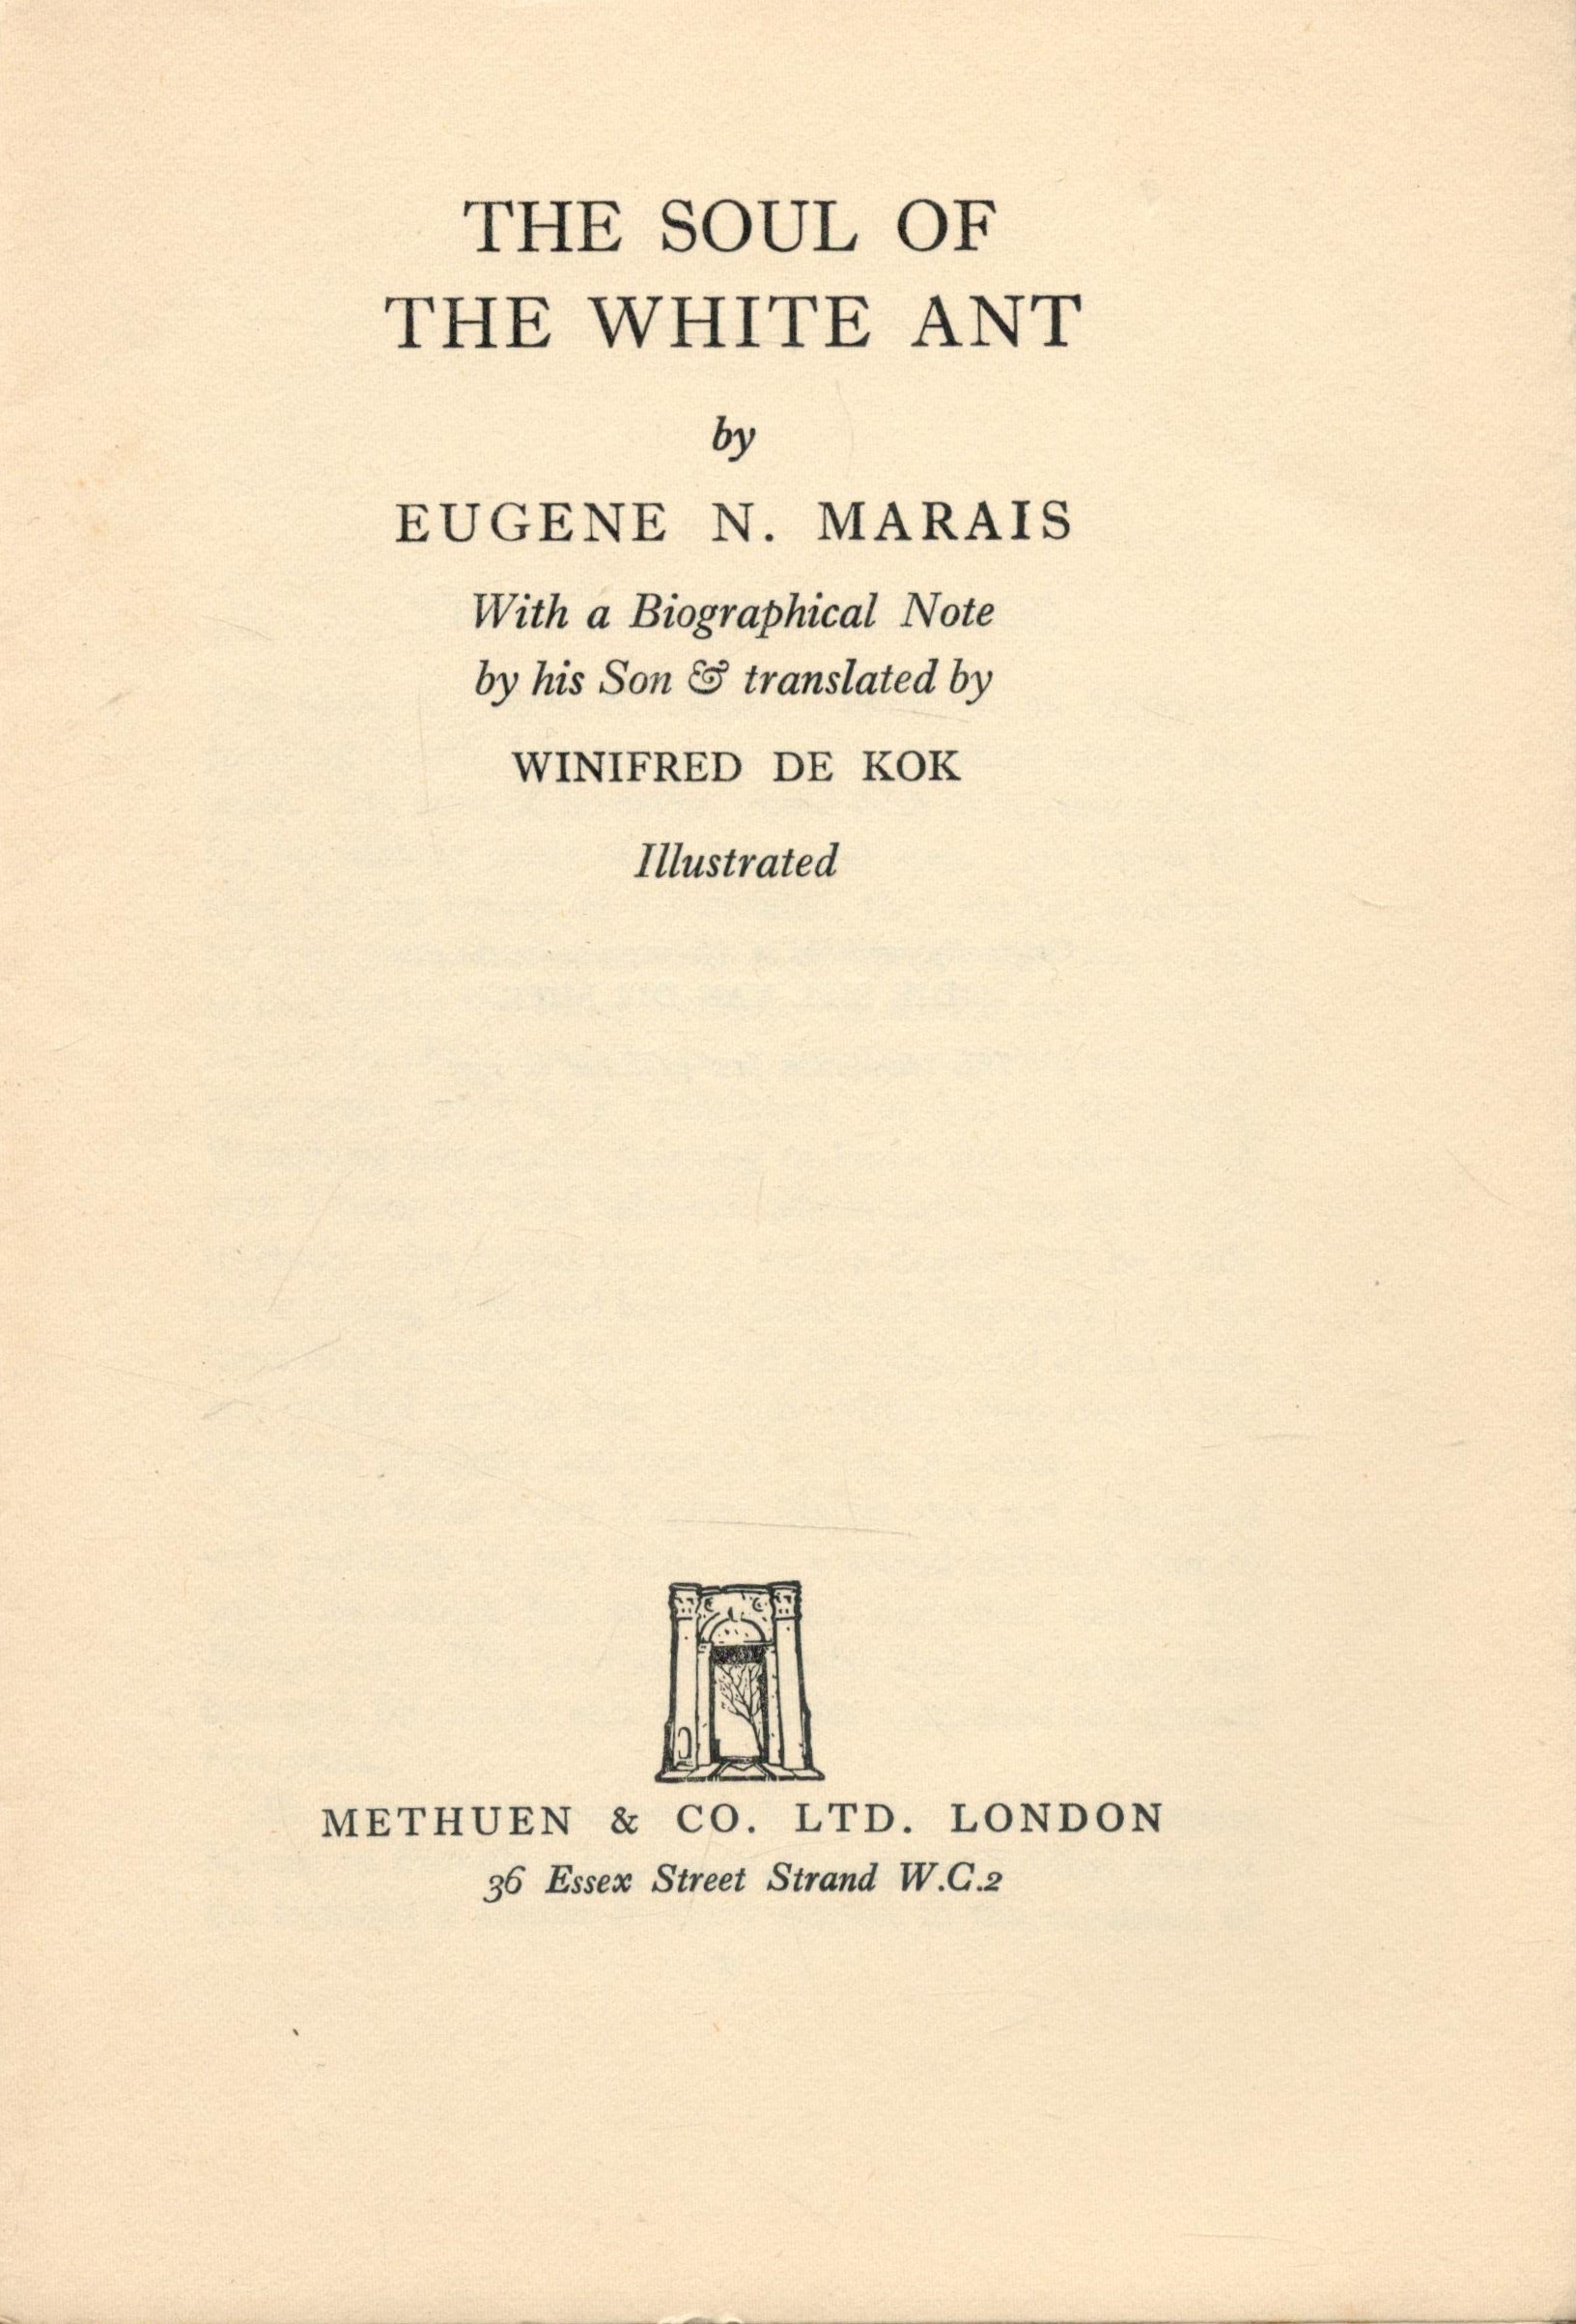 Eugene N. Marais The Soul of The White Ant. With a biographical note by his son and translated by - Image 2 of 3